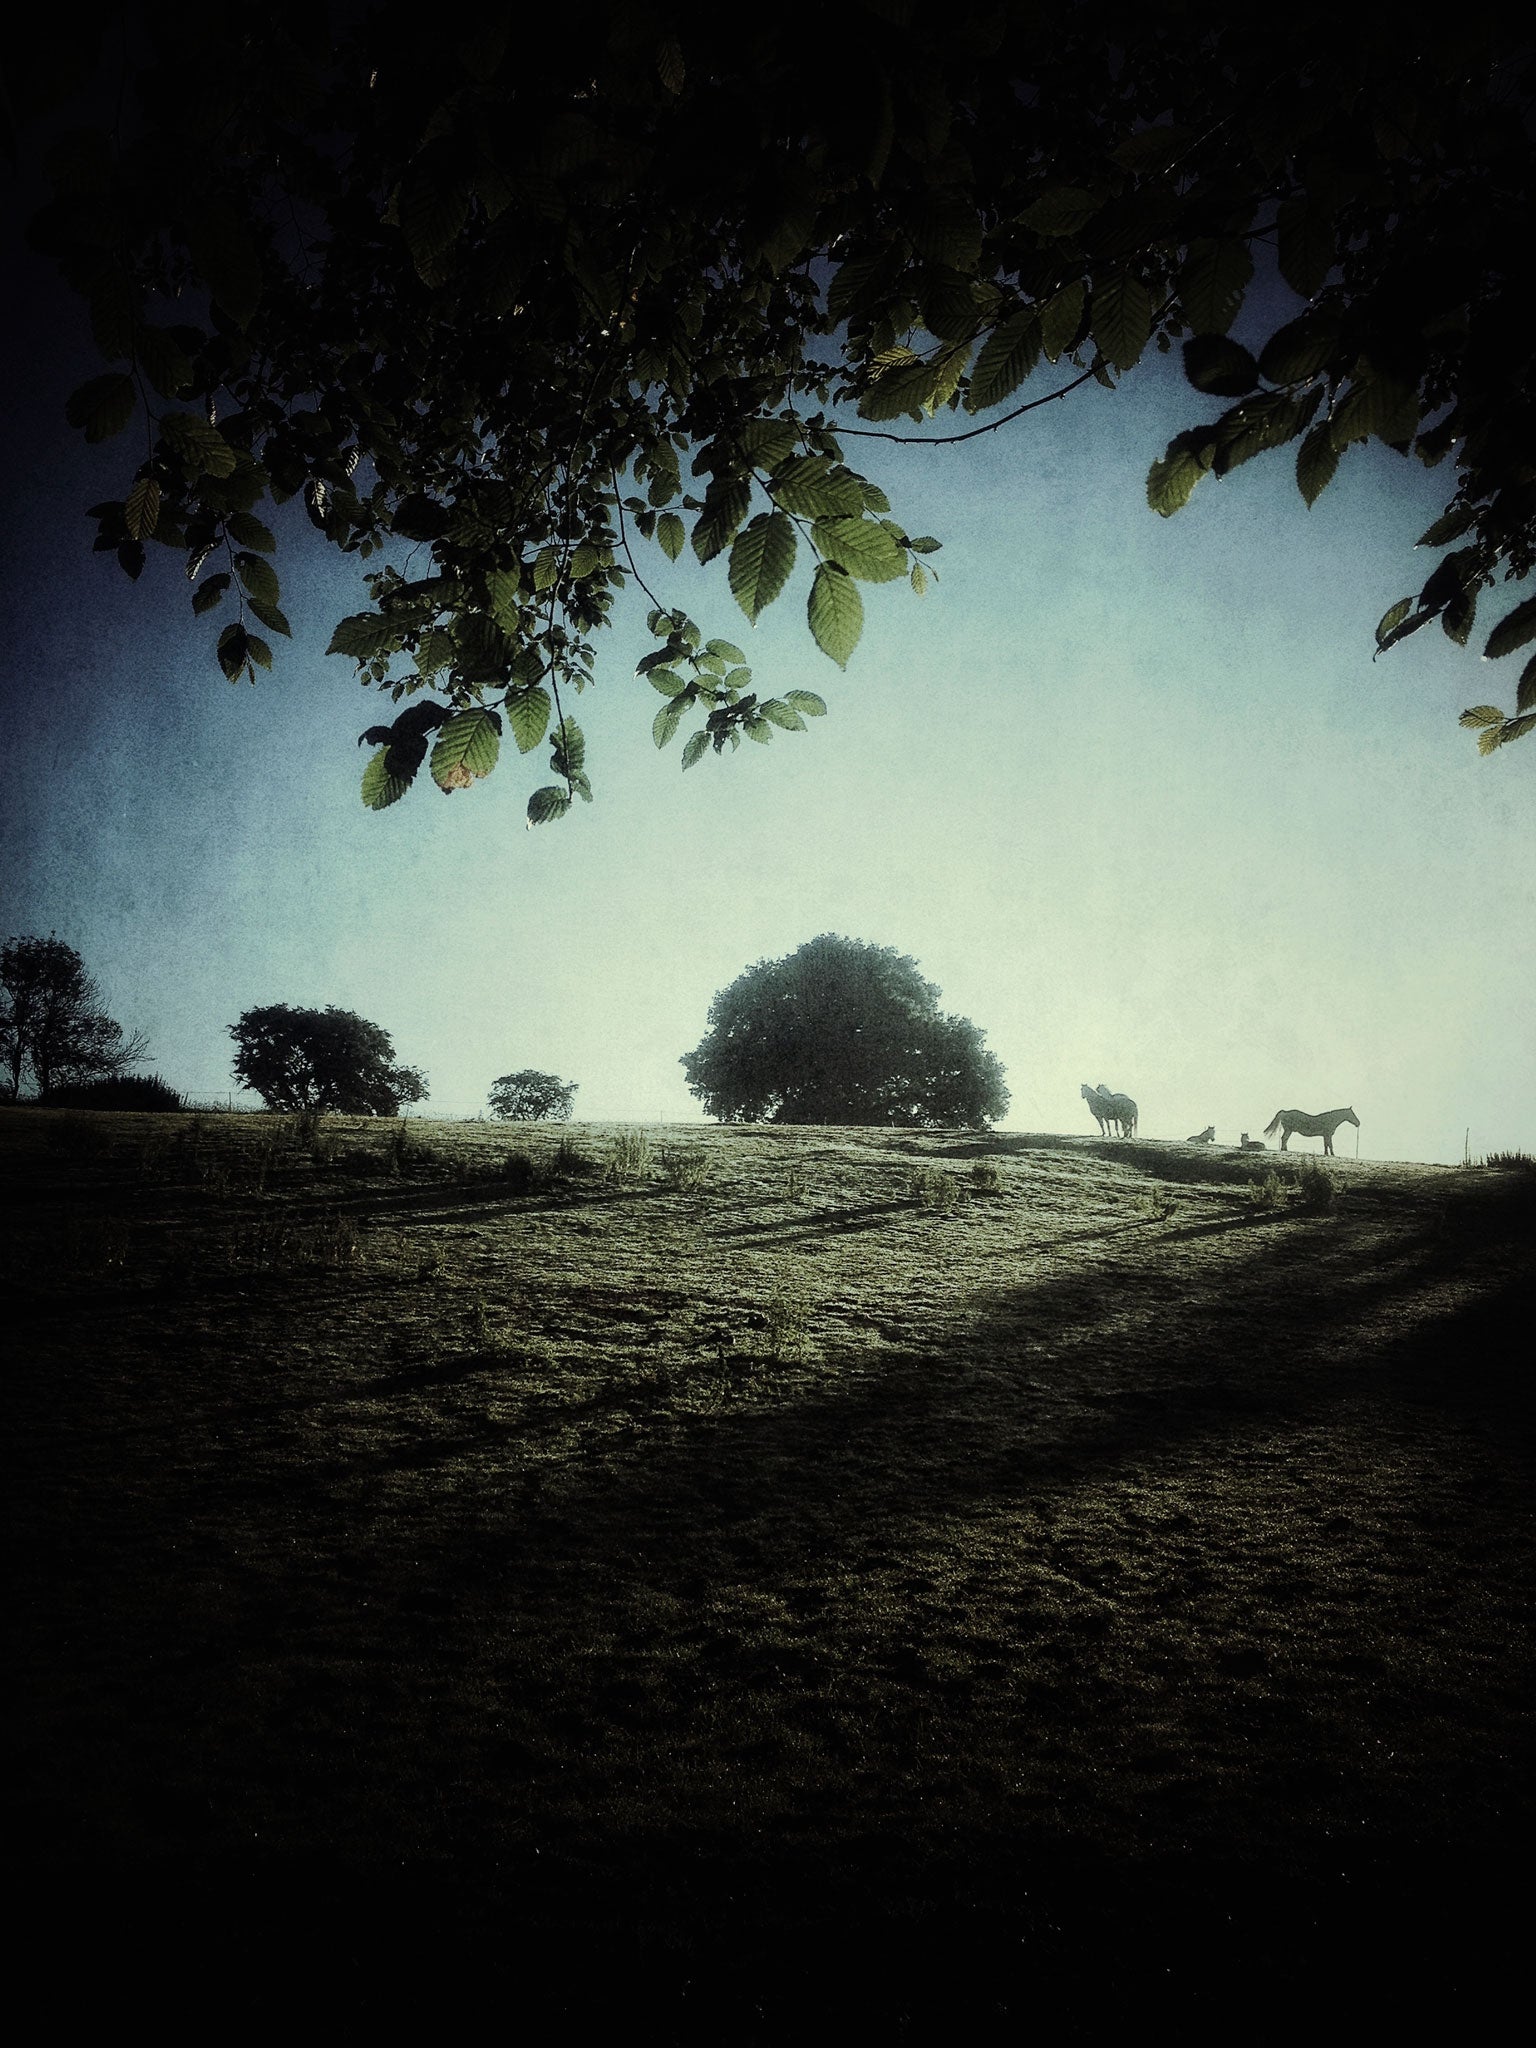 Photographs taken from #IPHONEONLY by Julian Calverley, available signed for £20 from juliancalverley.com